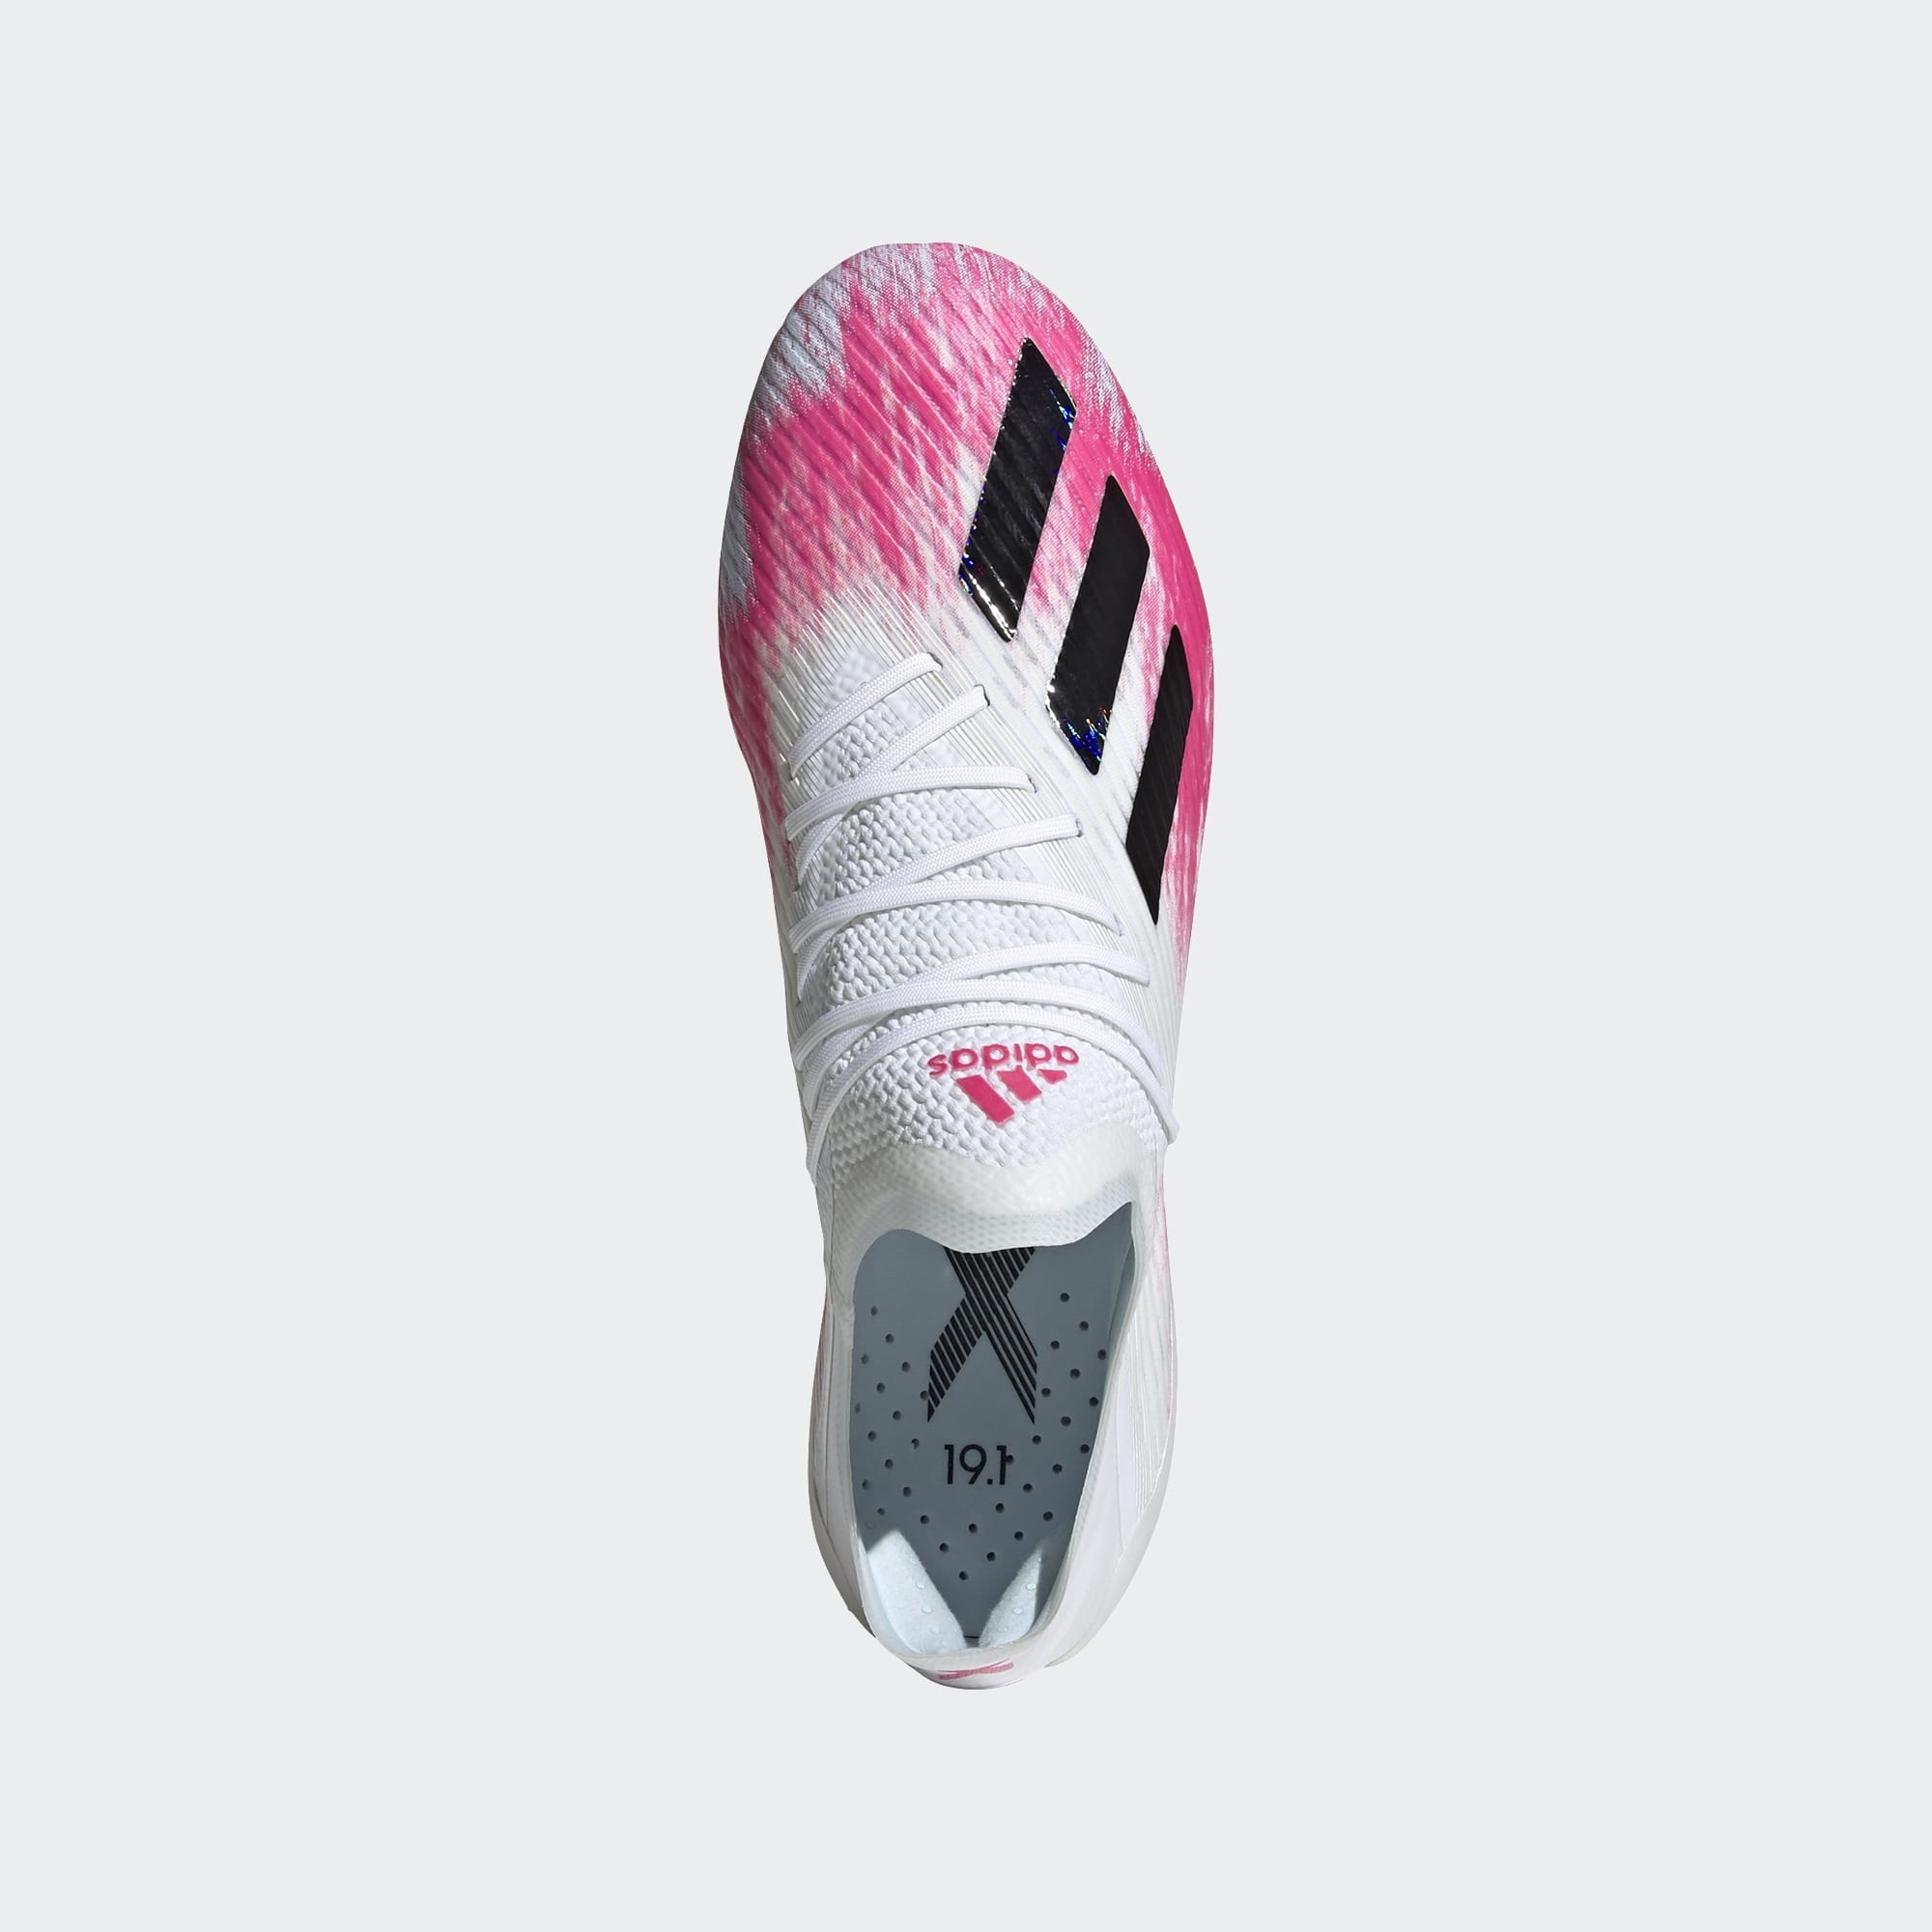 Adidas X 19 1 Sg Cloud White Core Black Shock Pink Pro Keepers Line